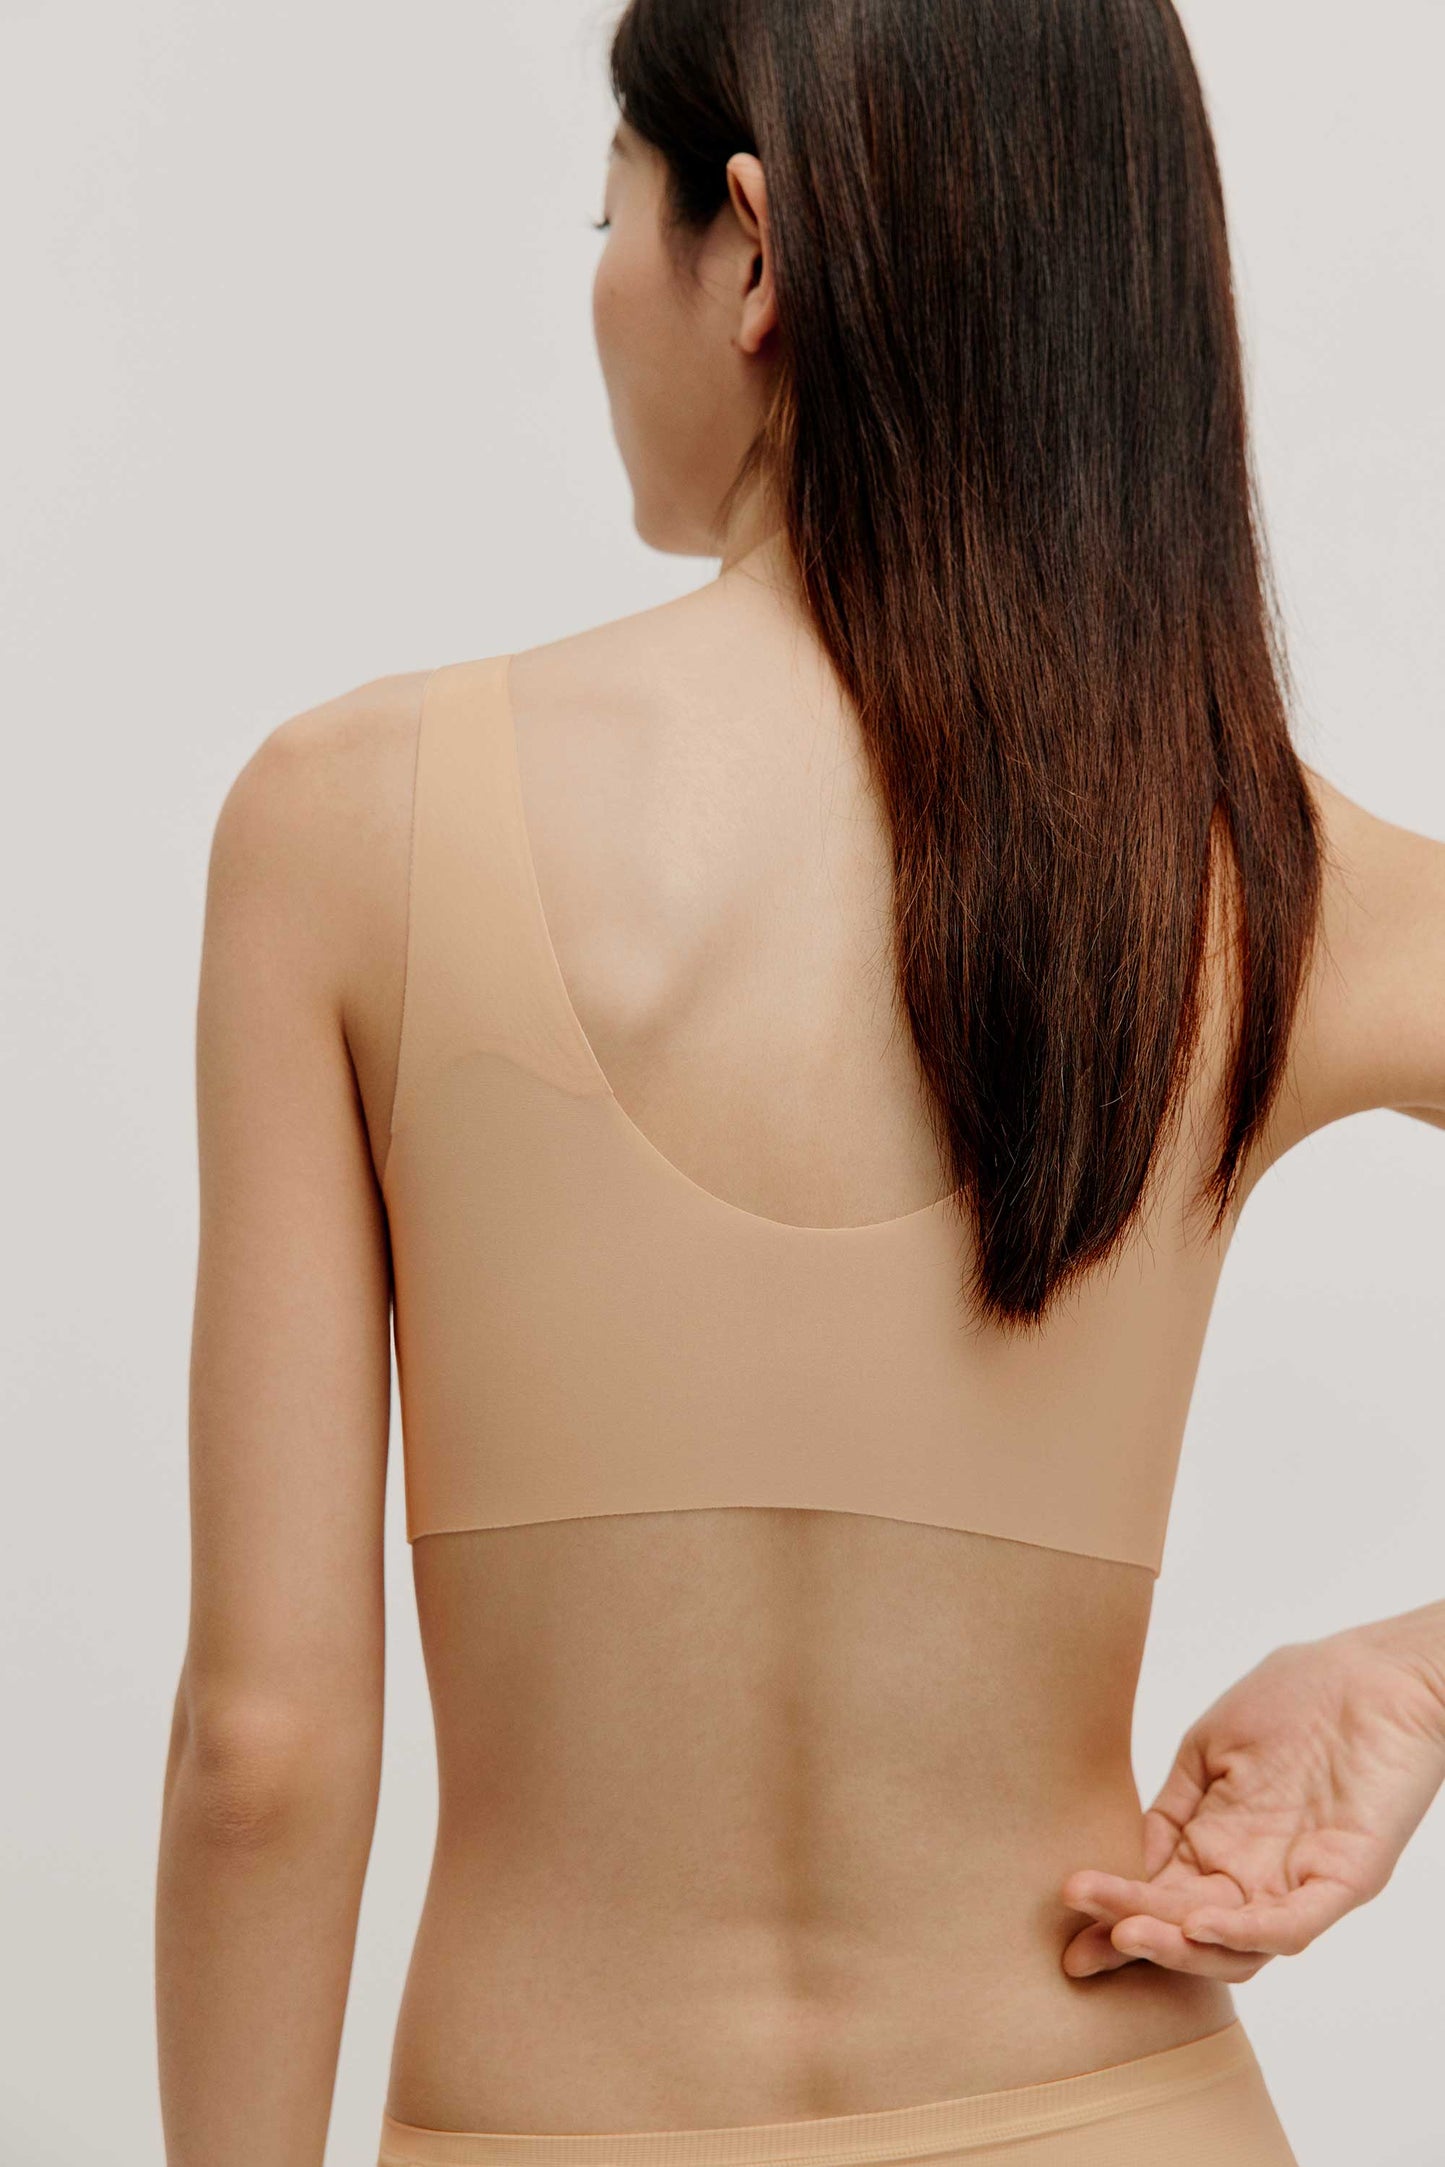 back of woman wearing nude color bra